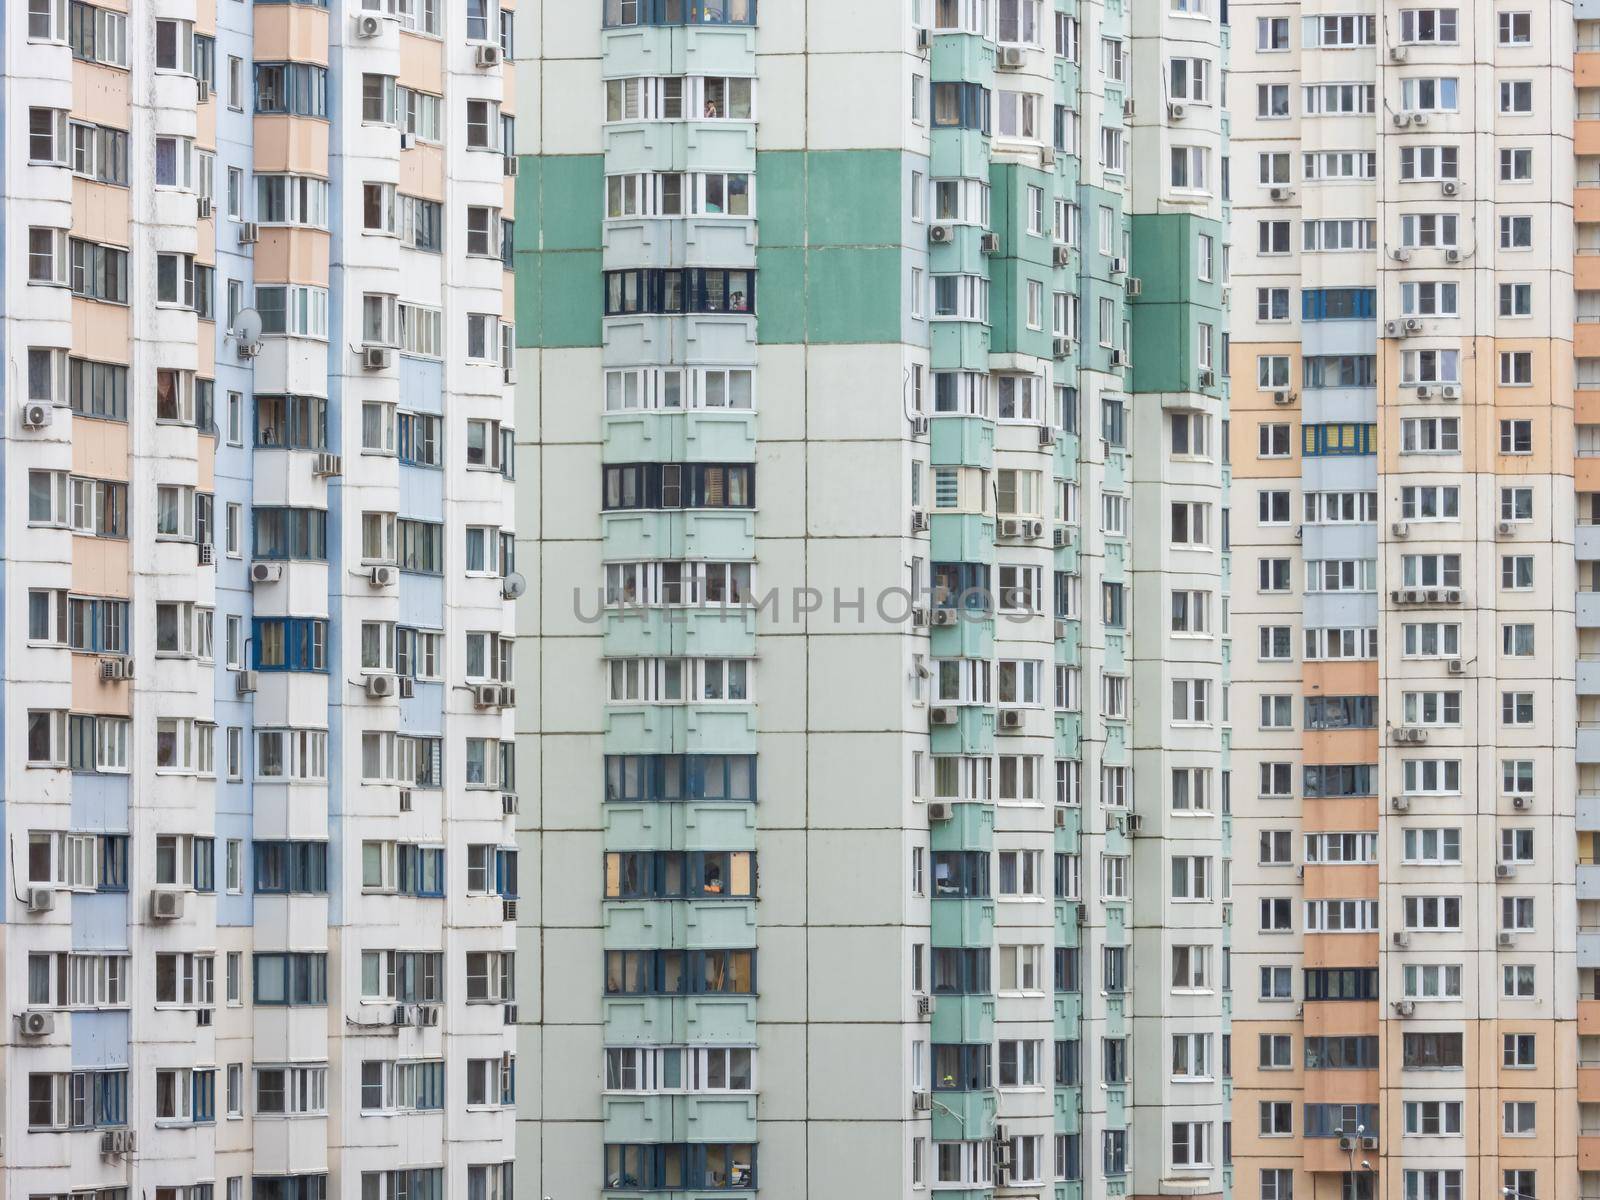 Fragment of the facade of high-rise residential buildings. Urban stone jungle